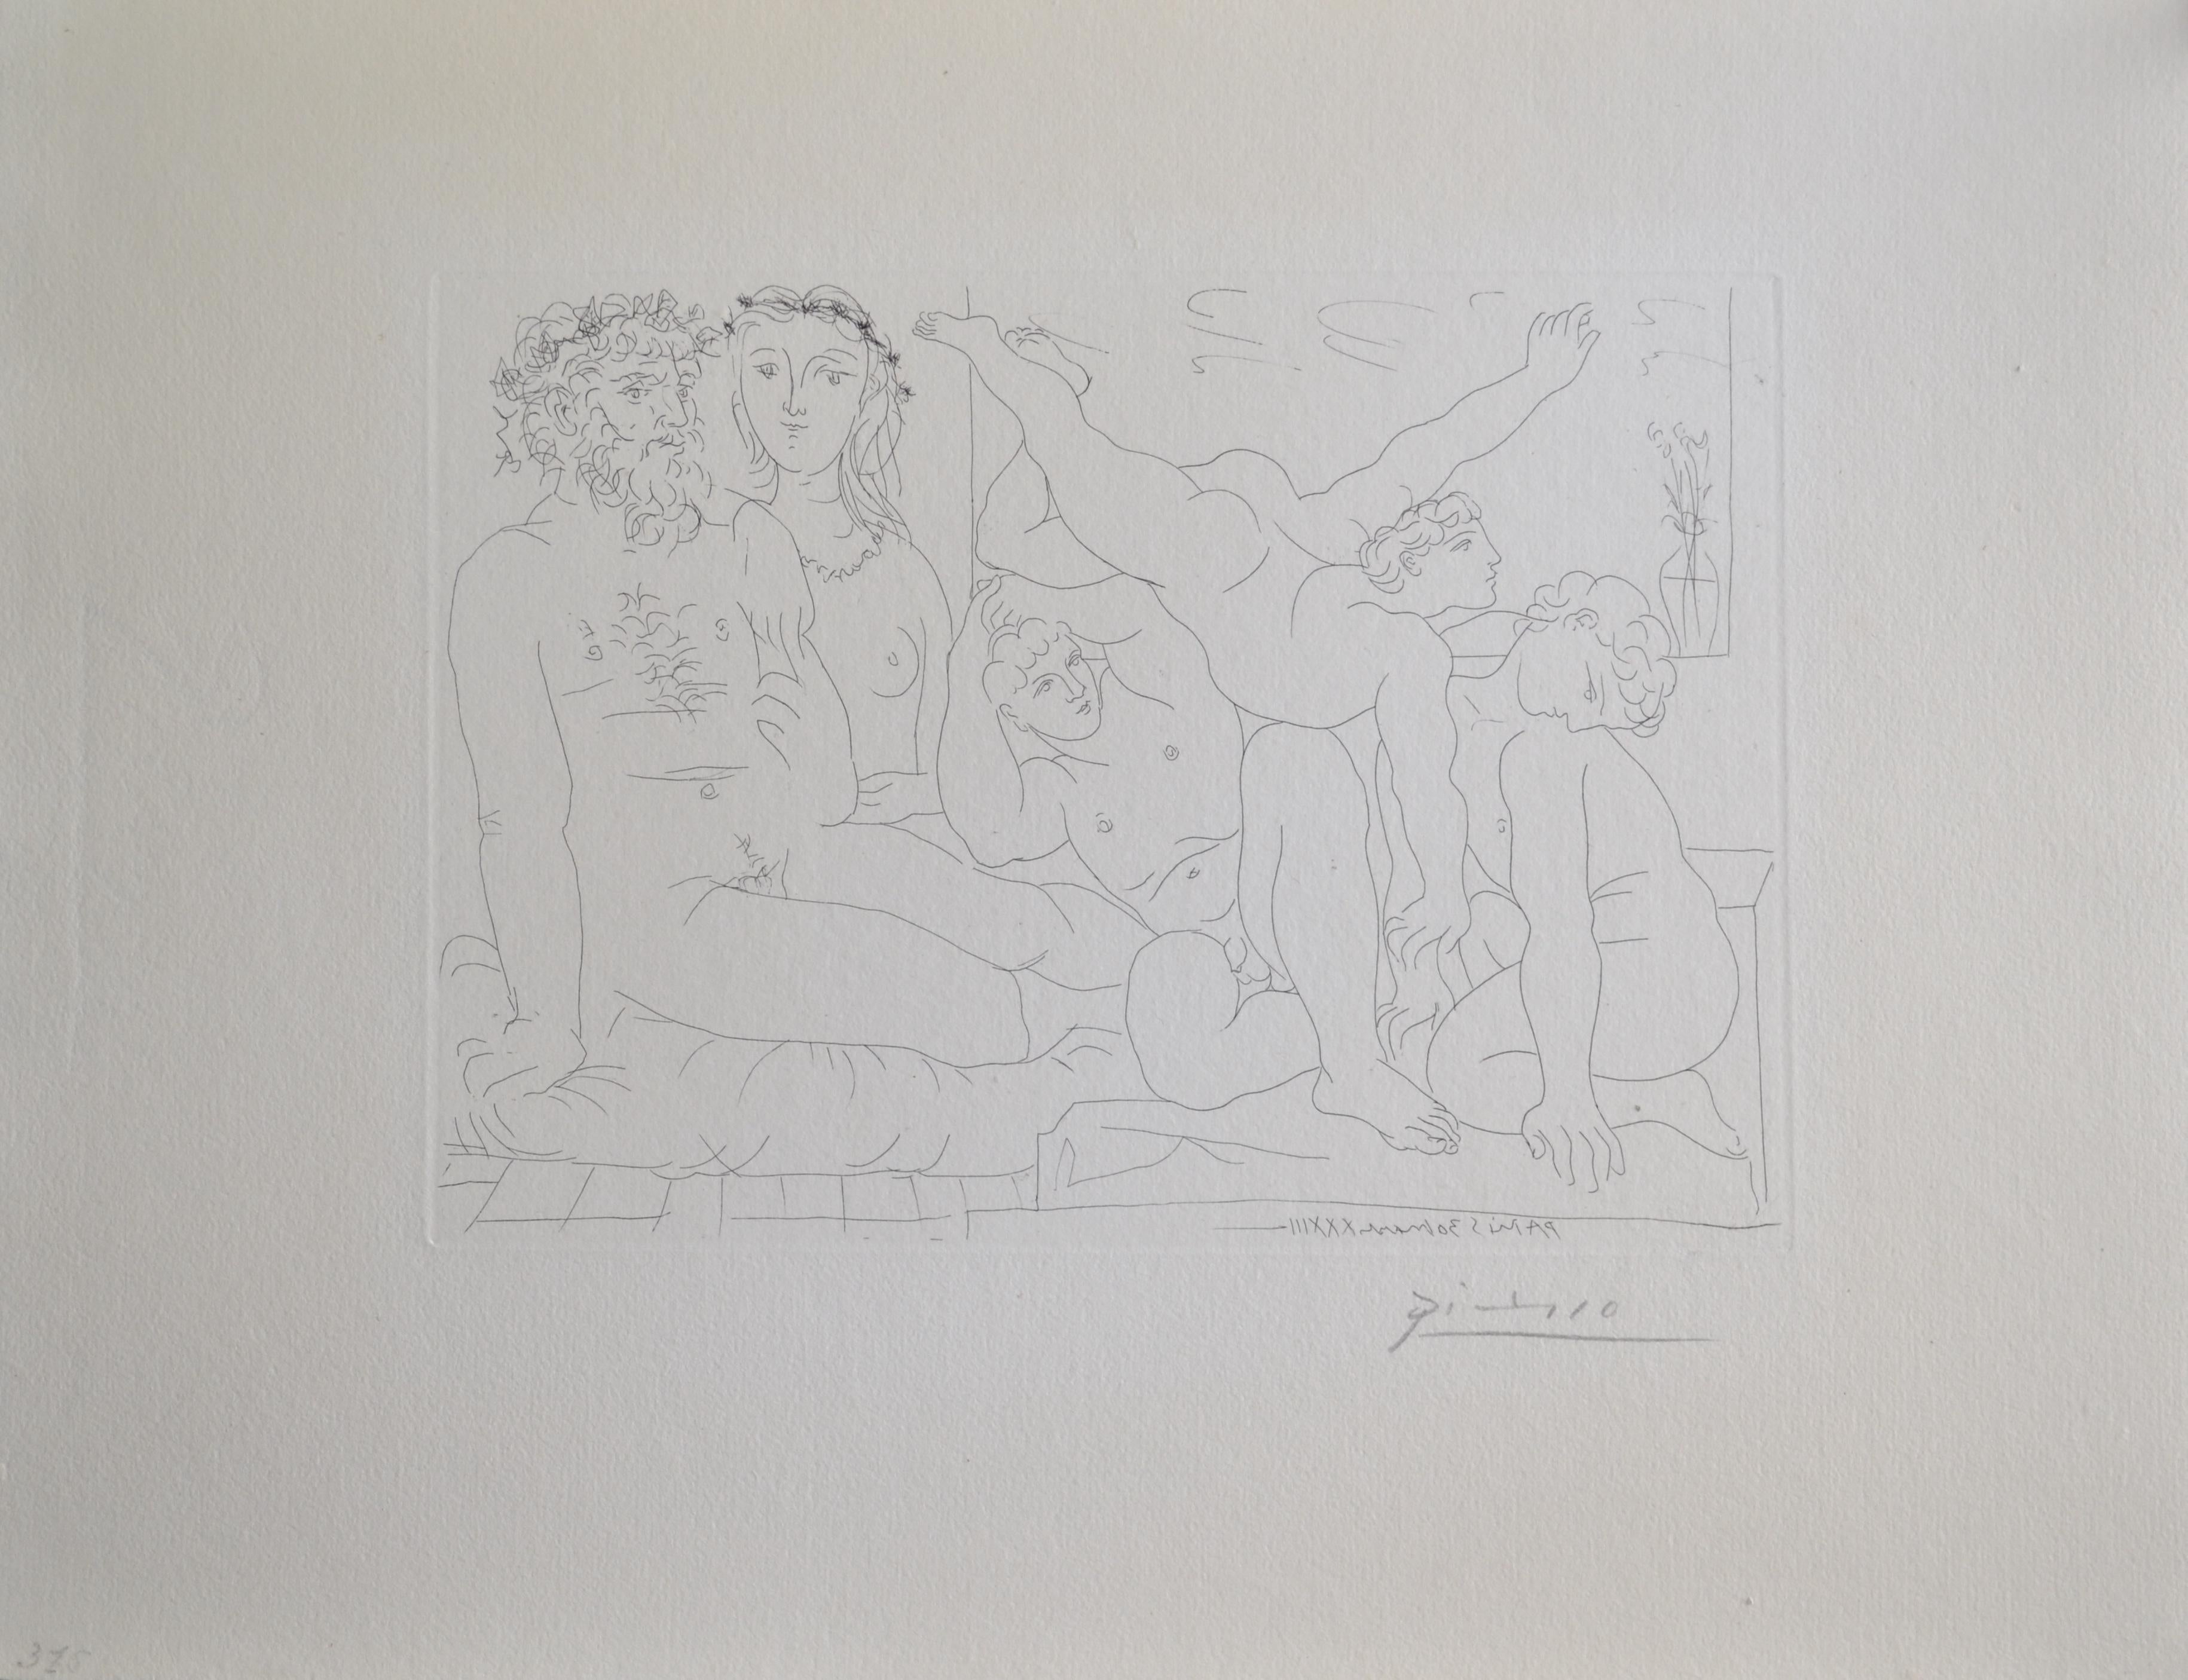 Famille de Saltimbanques (B163 Vollard) - Print by Pablo Picasso